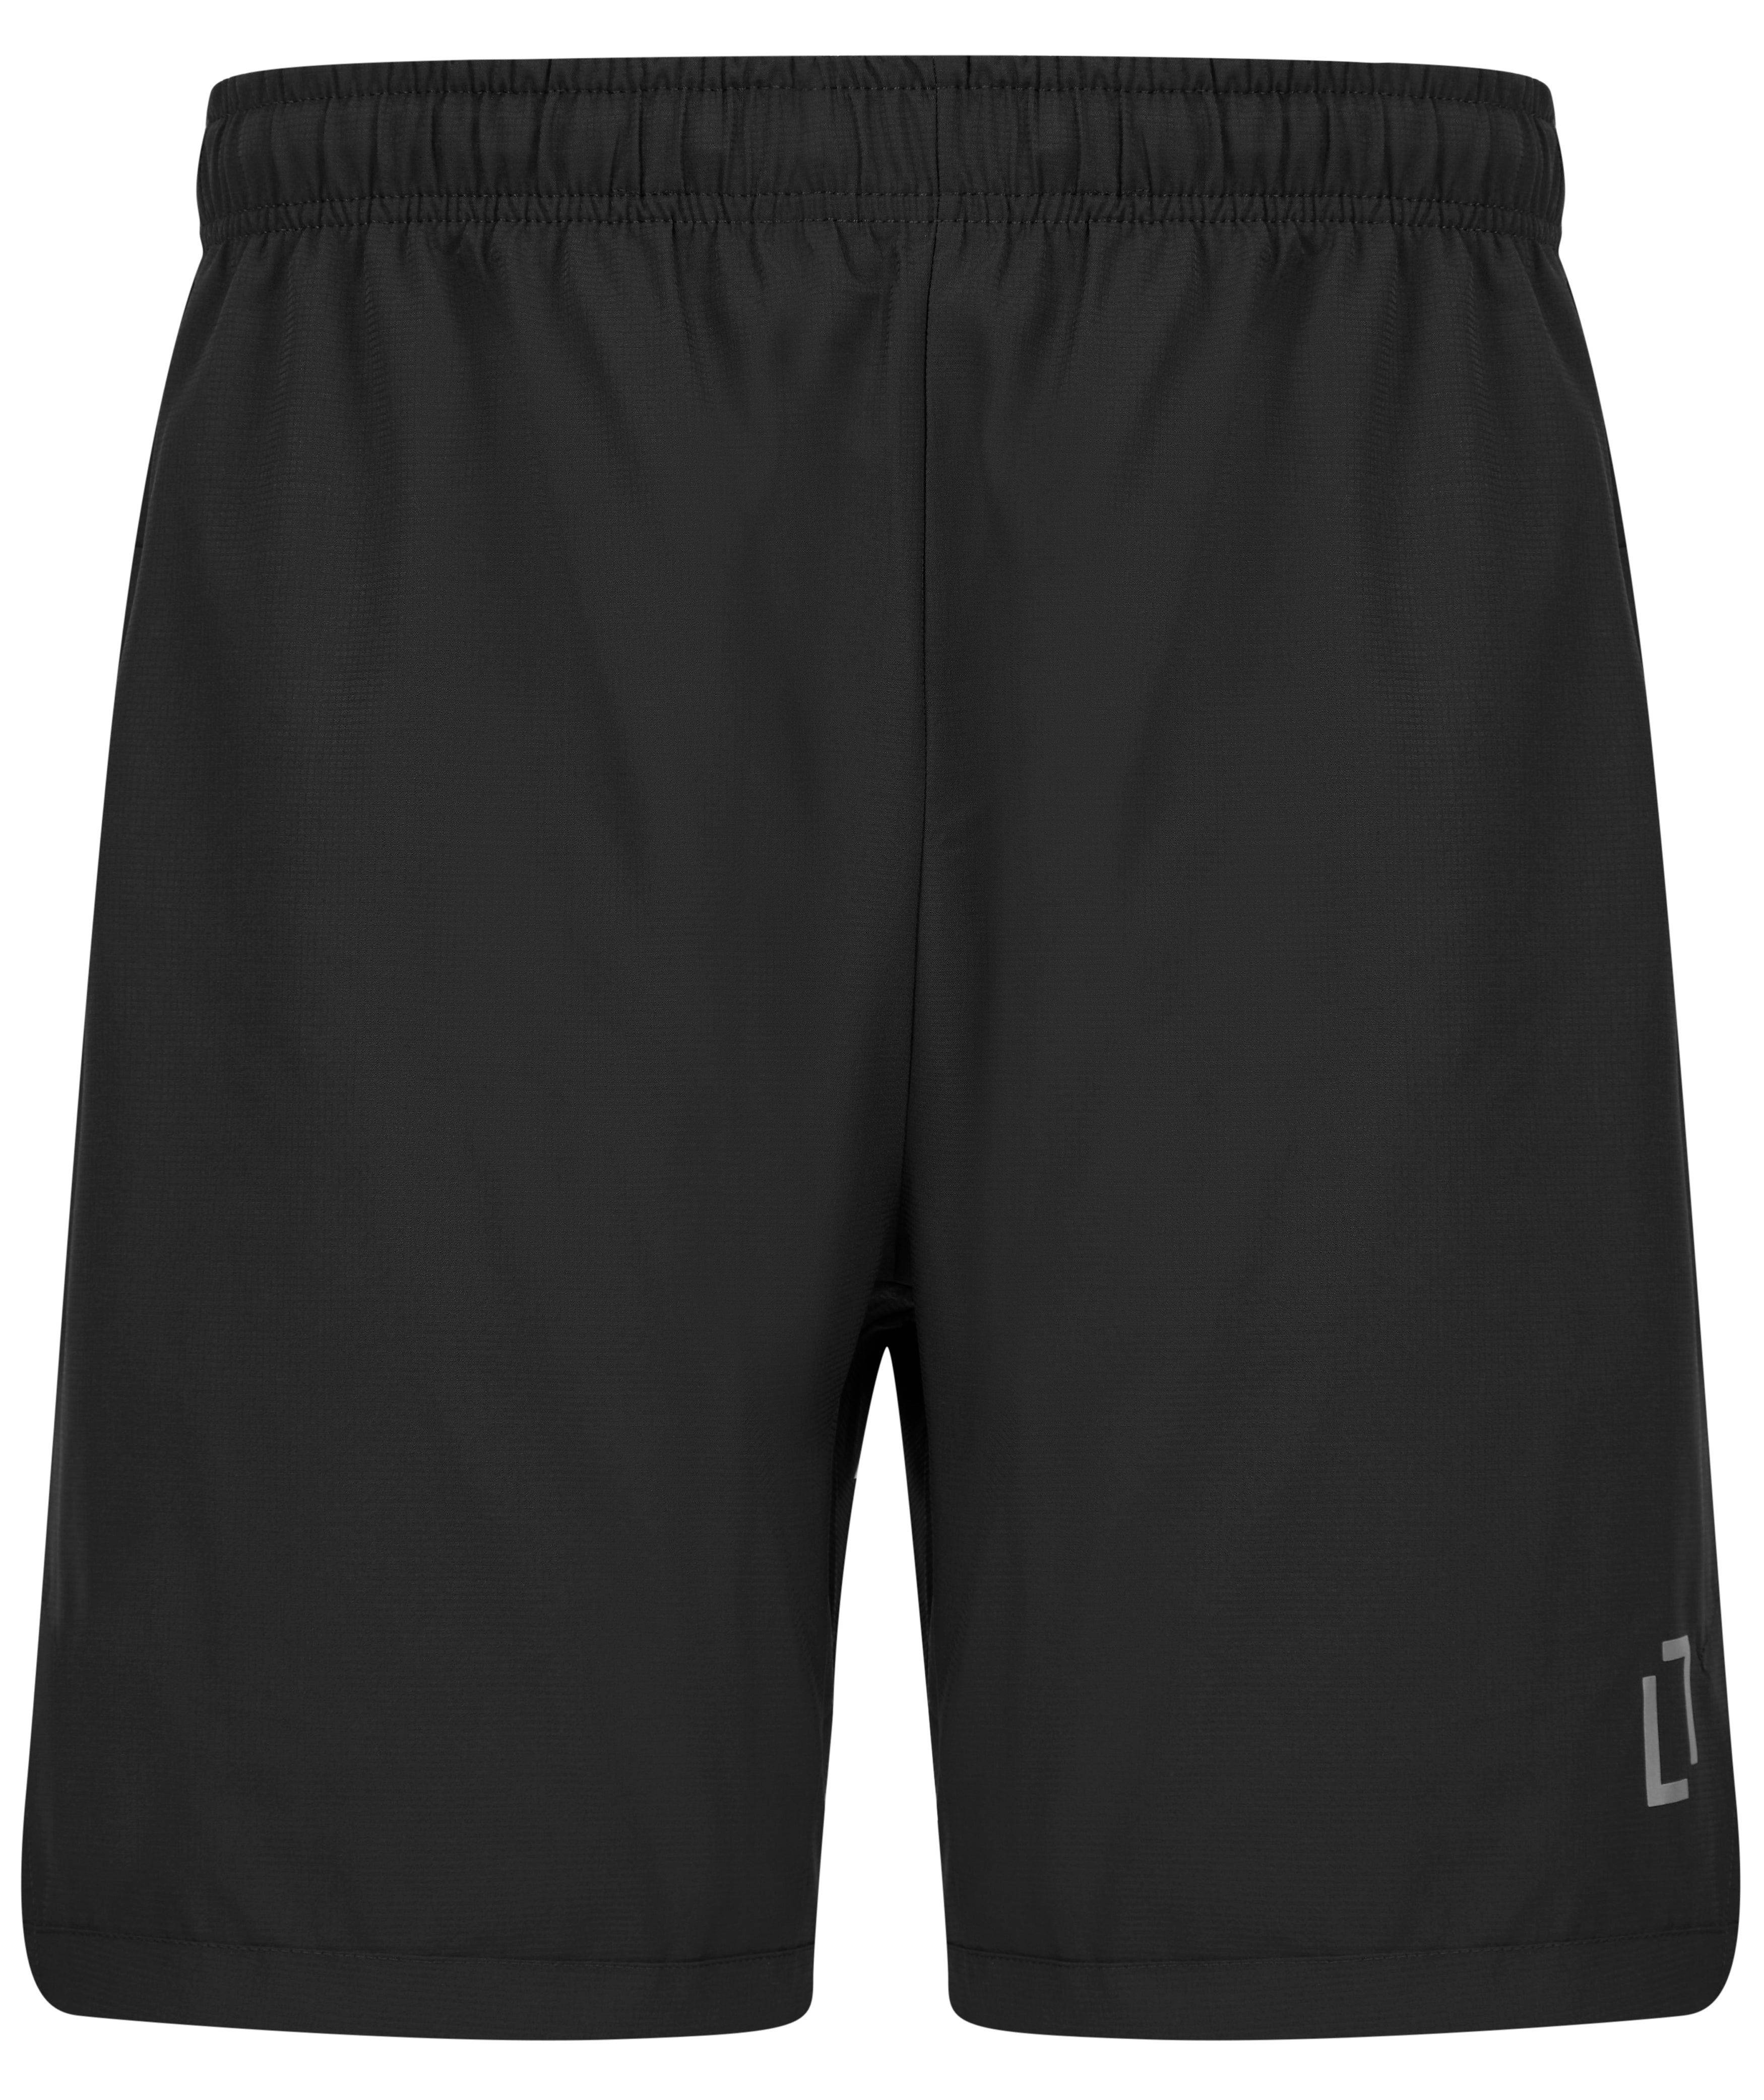 Load image into Gallery viewer, Bulletto Gym Short Black
